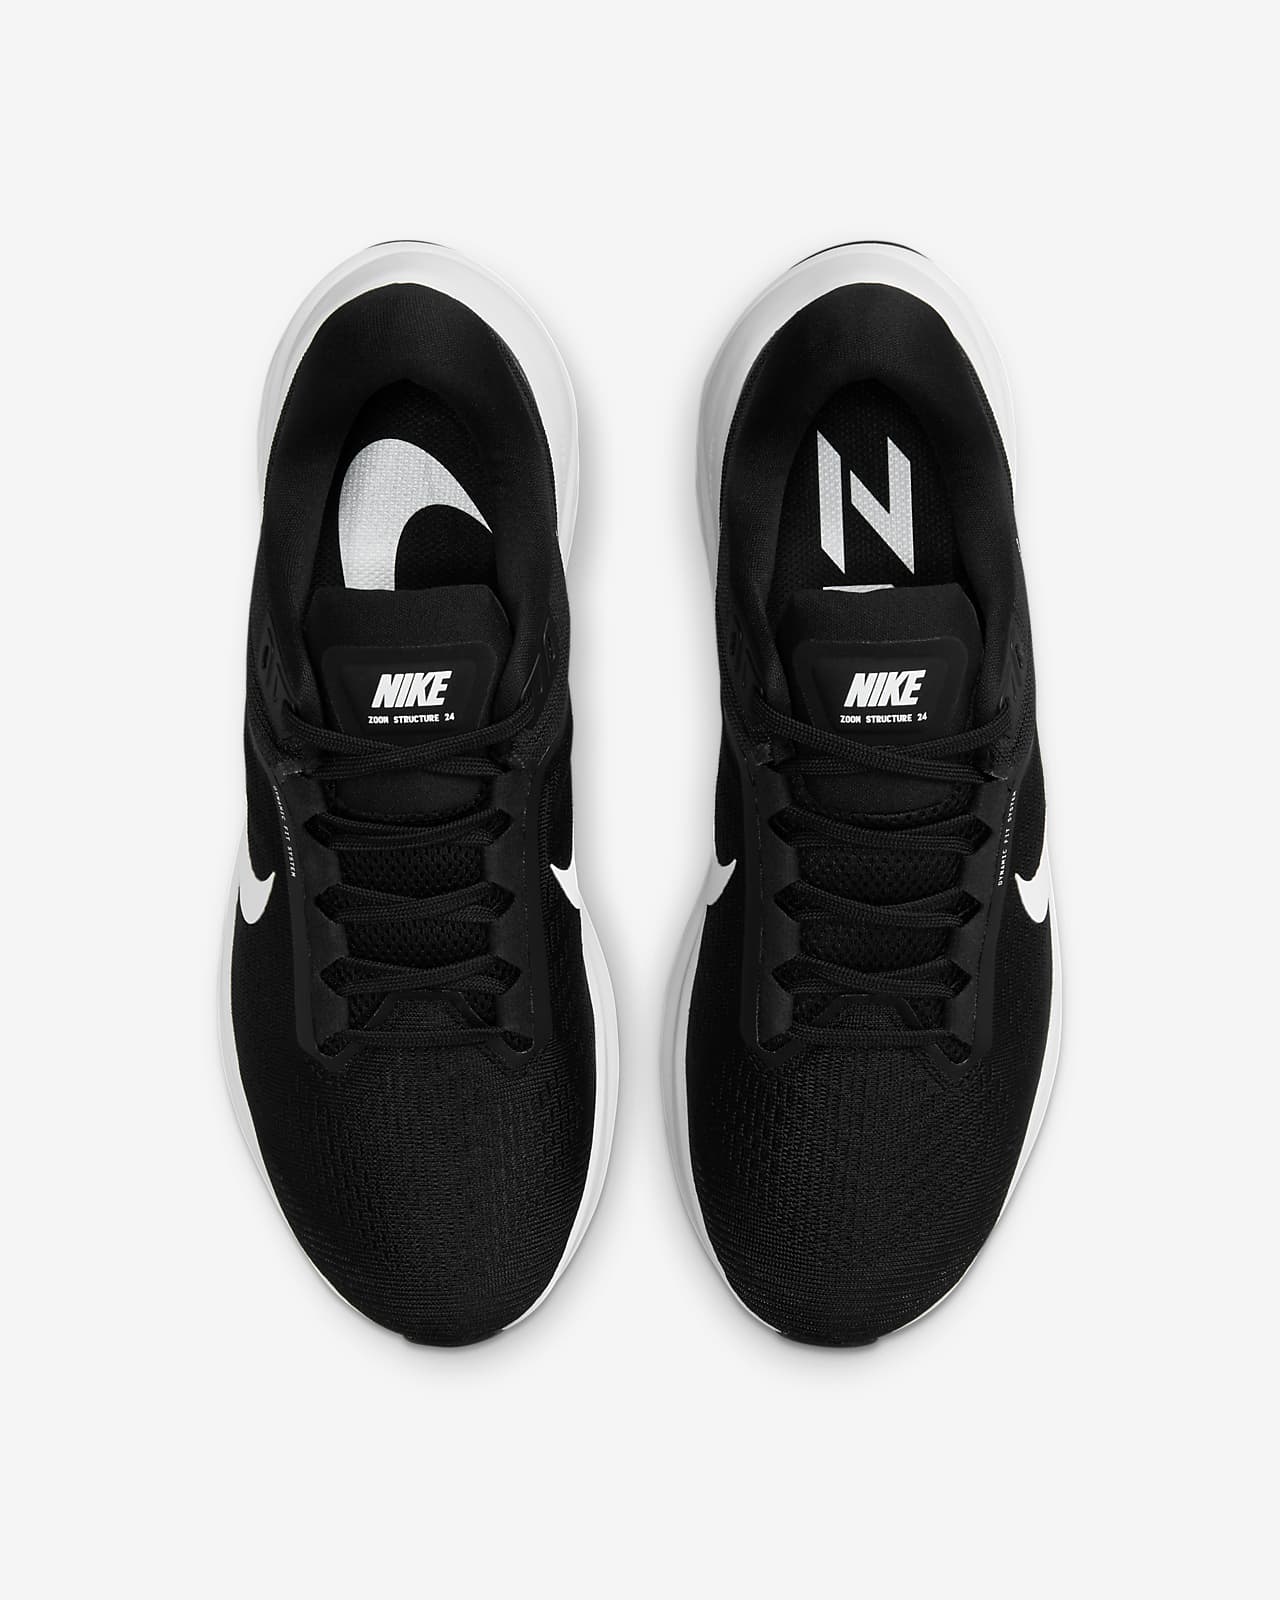 Nike 24 Road Running Shoes.